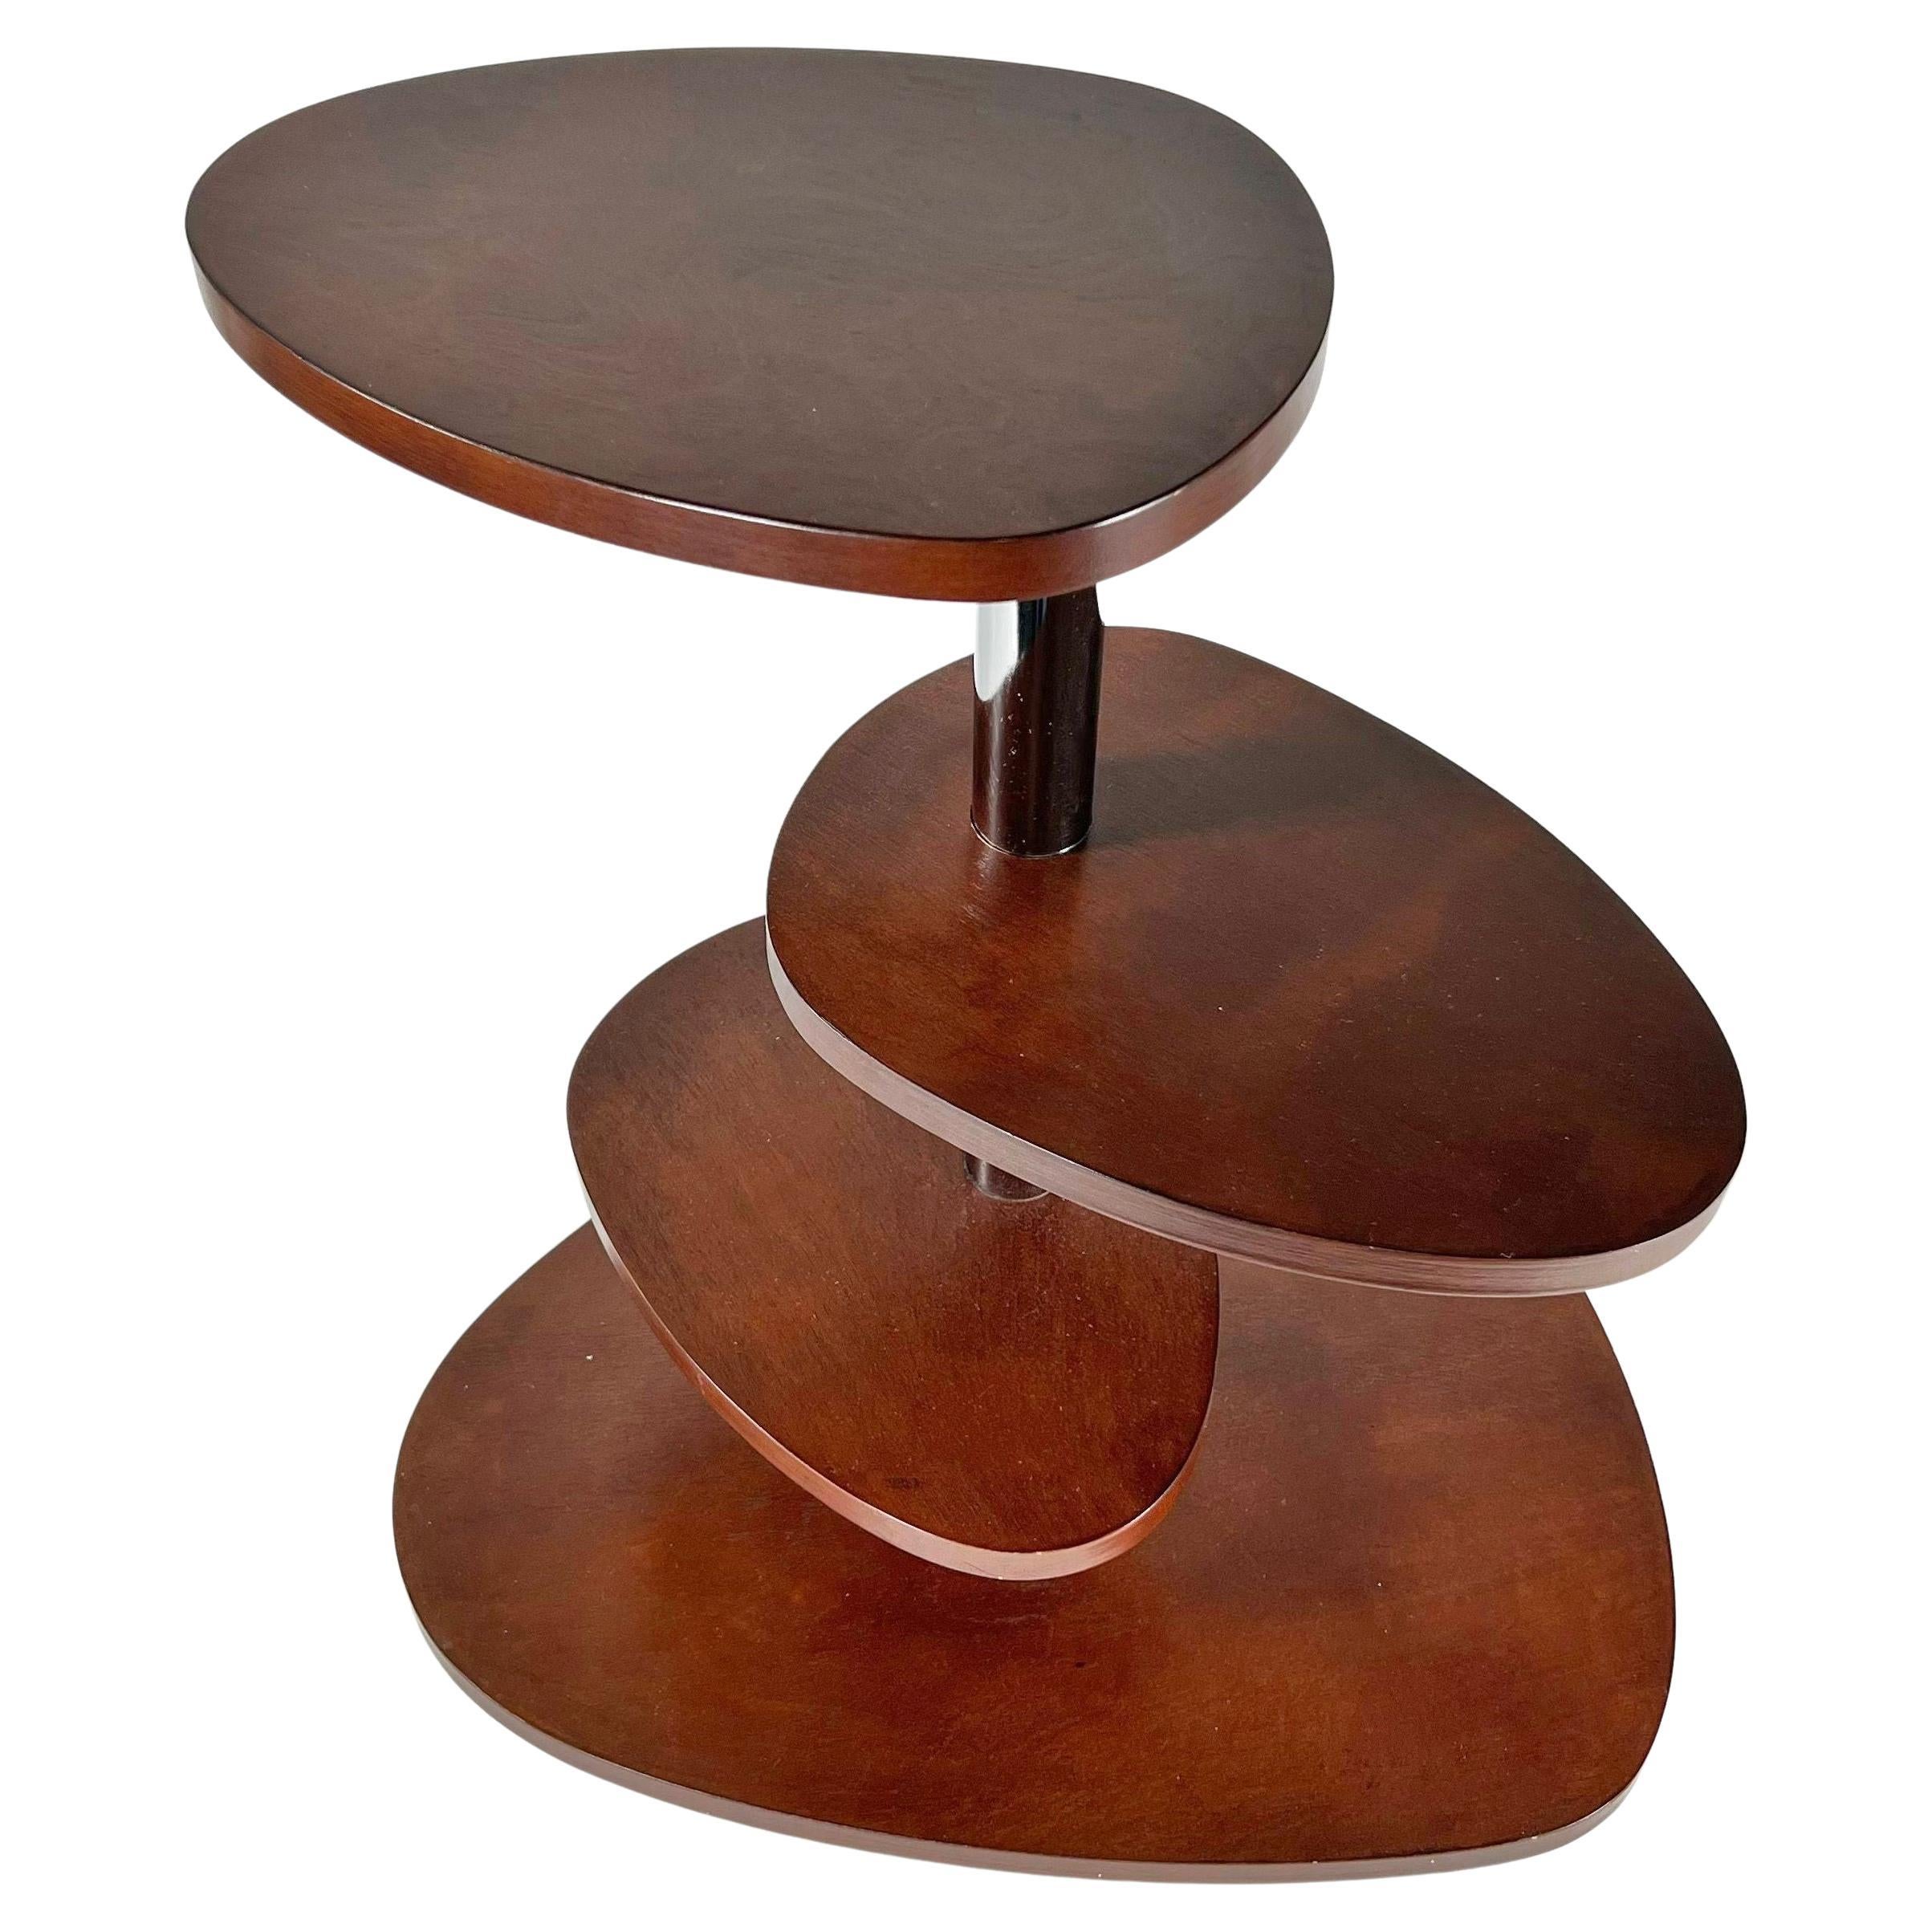 French Modern Mahogany 4 Tier Pivoting Mexique Table, Style Charlotte Perriand For Sale